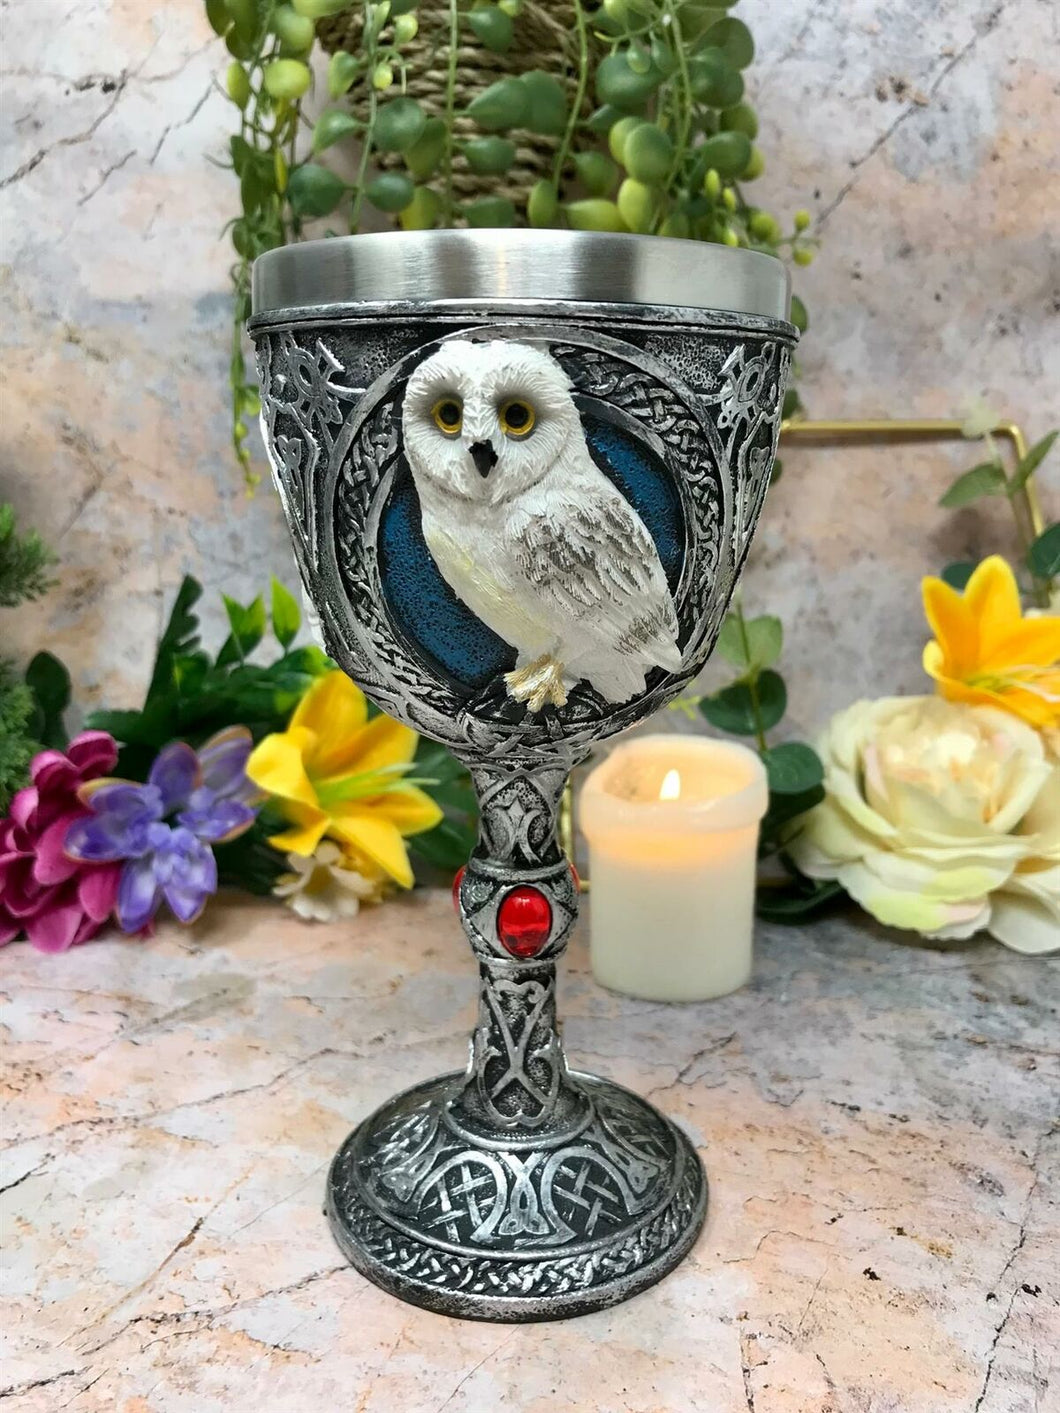 Wise Owl Goblet Chalice Gothic Decor Owls Collection Medieval Style Ornament